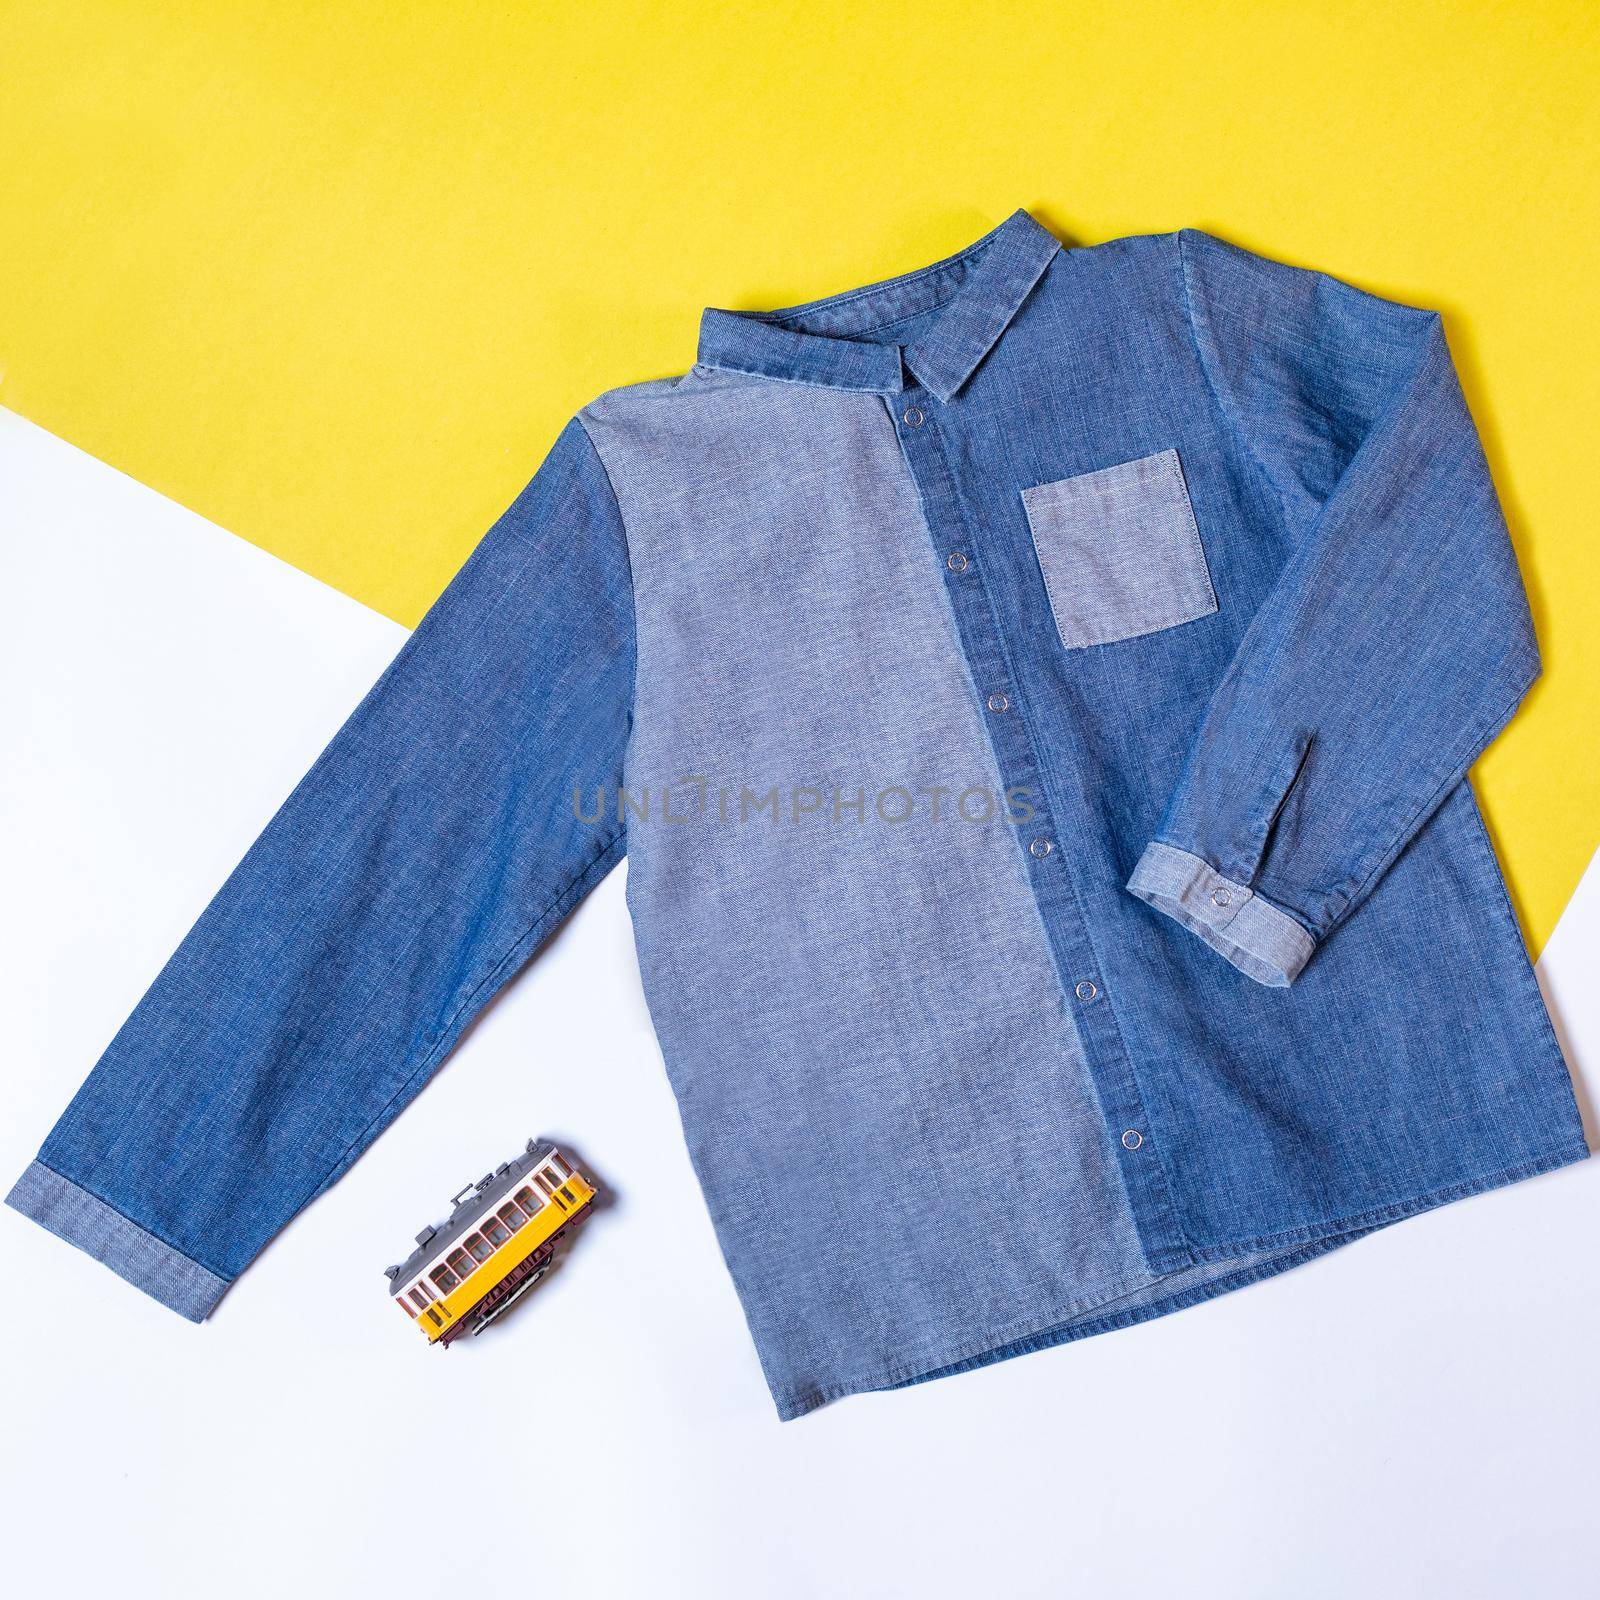 Blue denim jean shirt isolated top view by ferhad